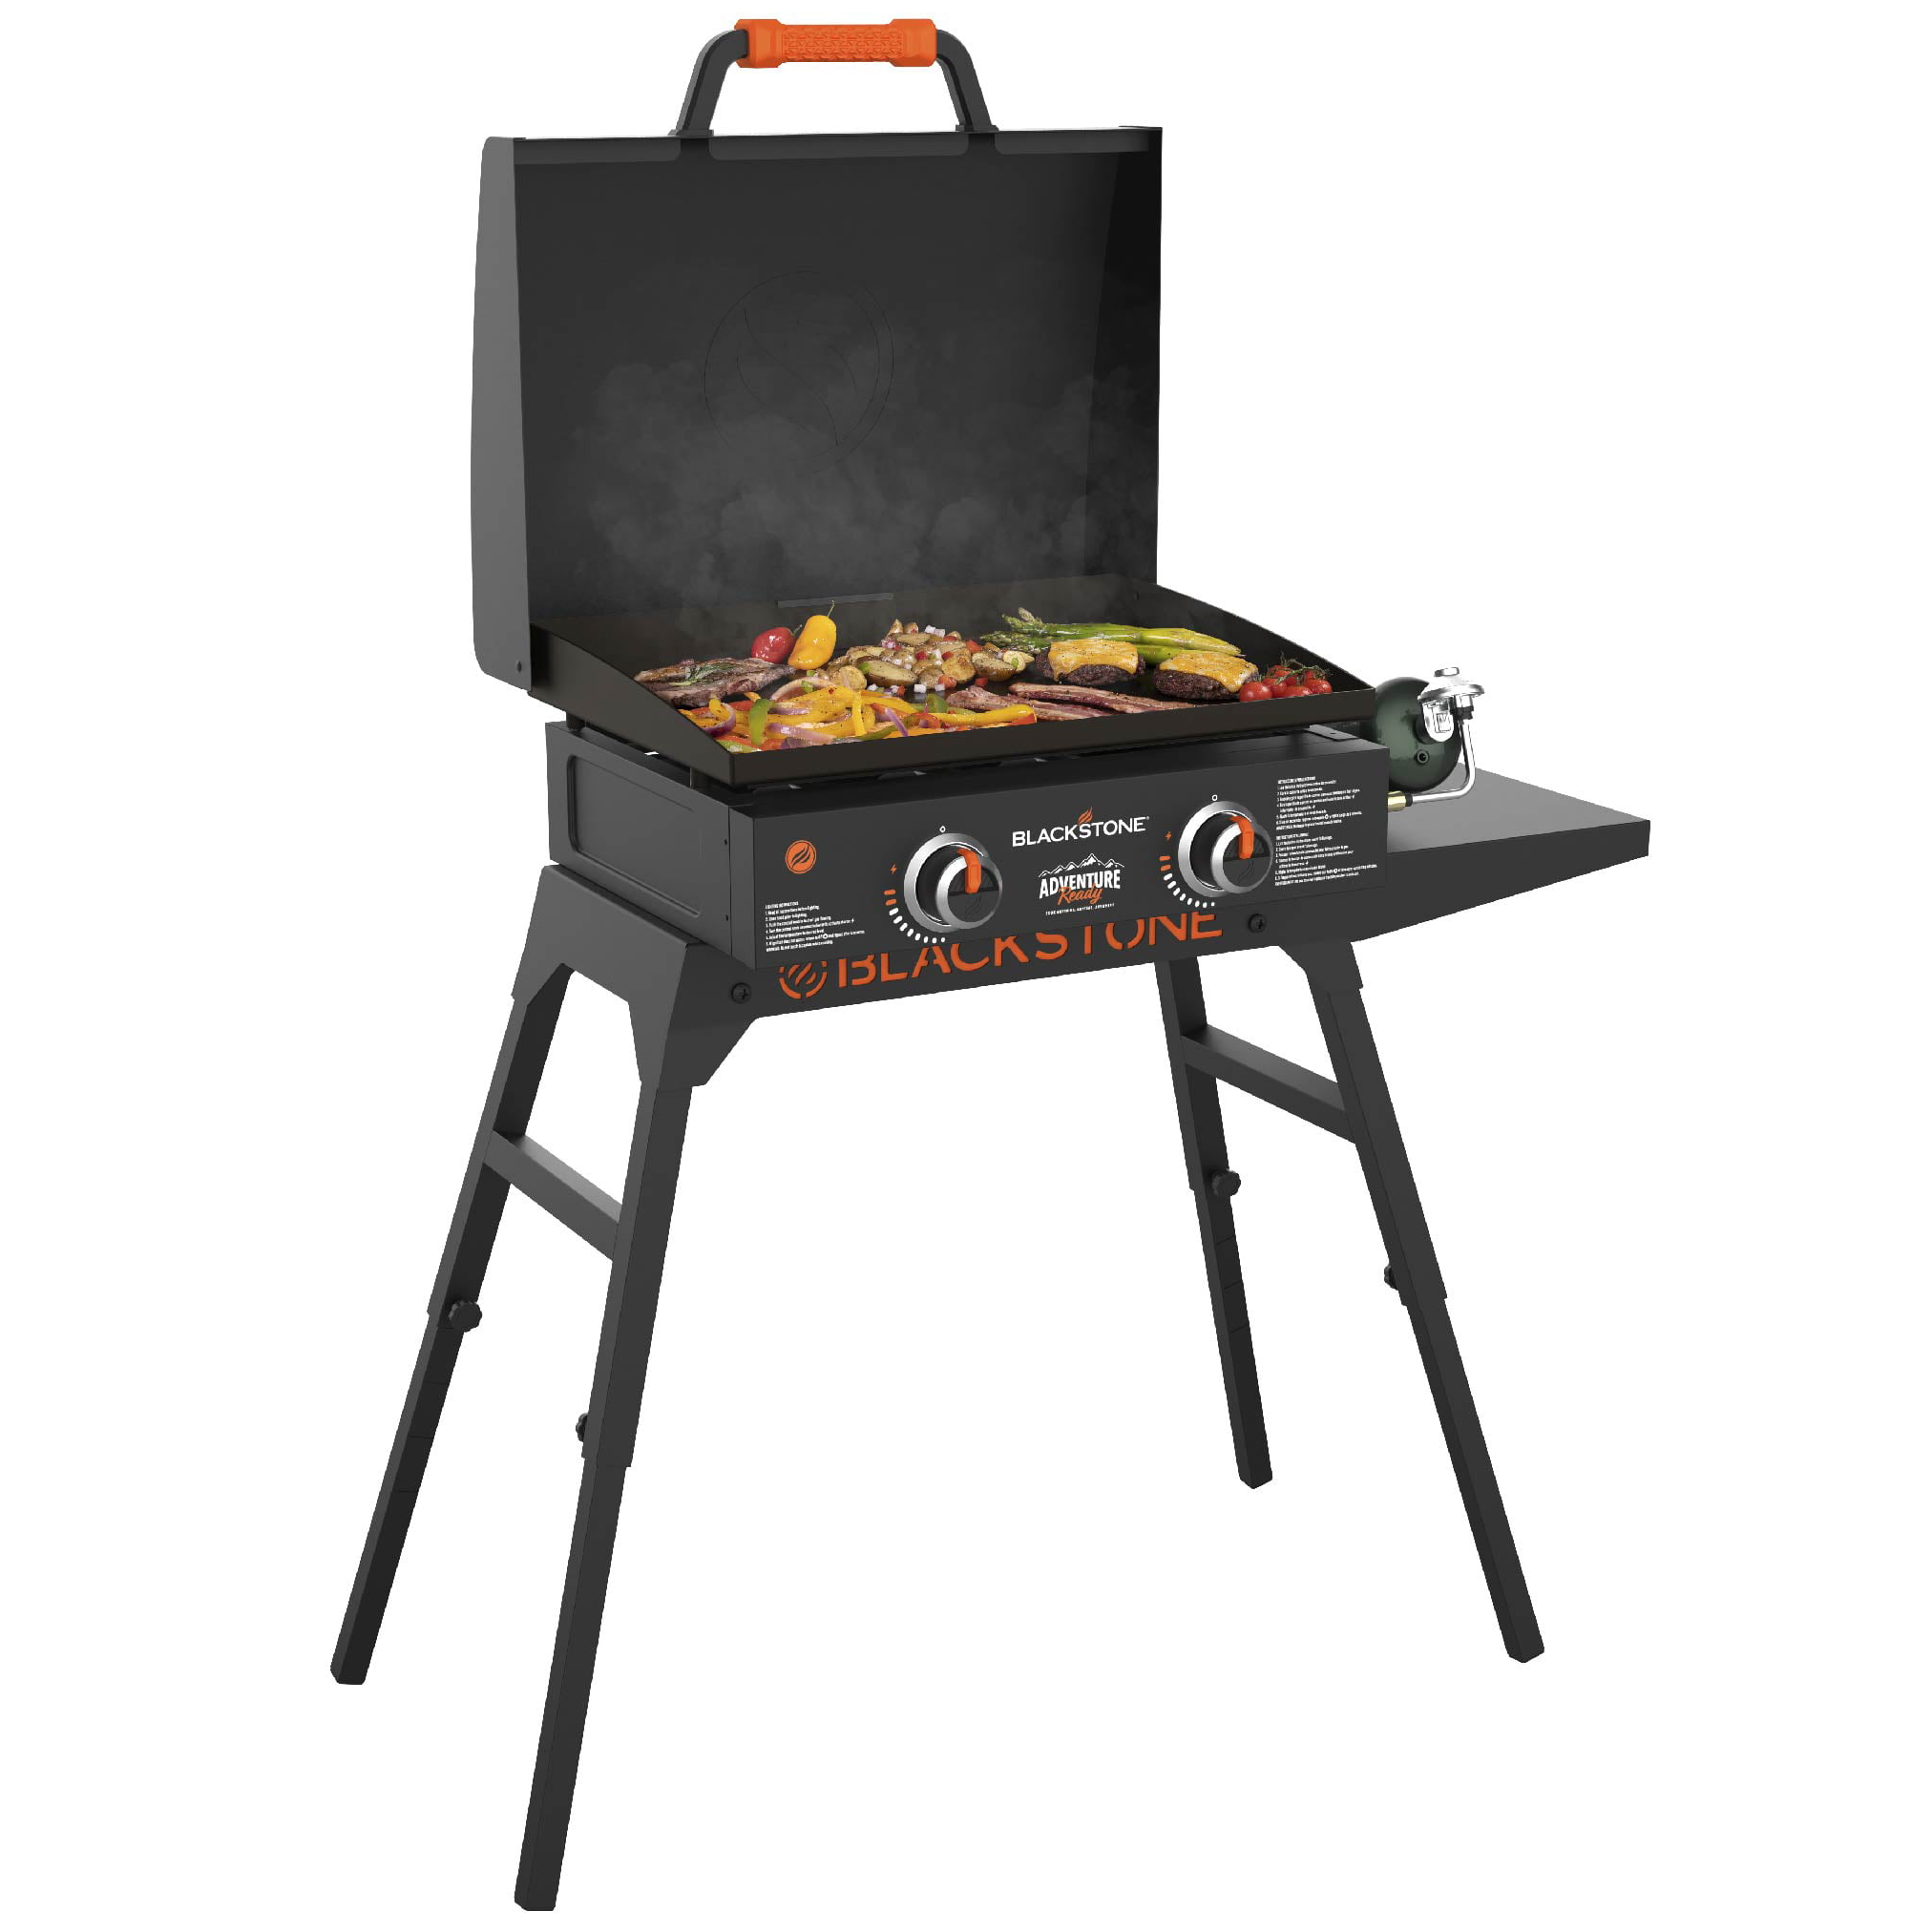 Blackstone Adventure Ready 22" Propane Griddle with Stand and Adapter Hose - image 1 of 16